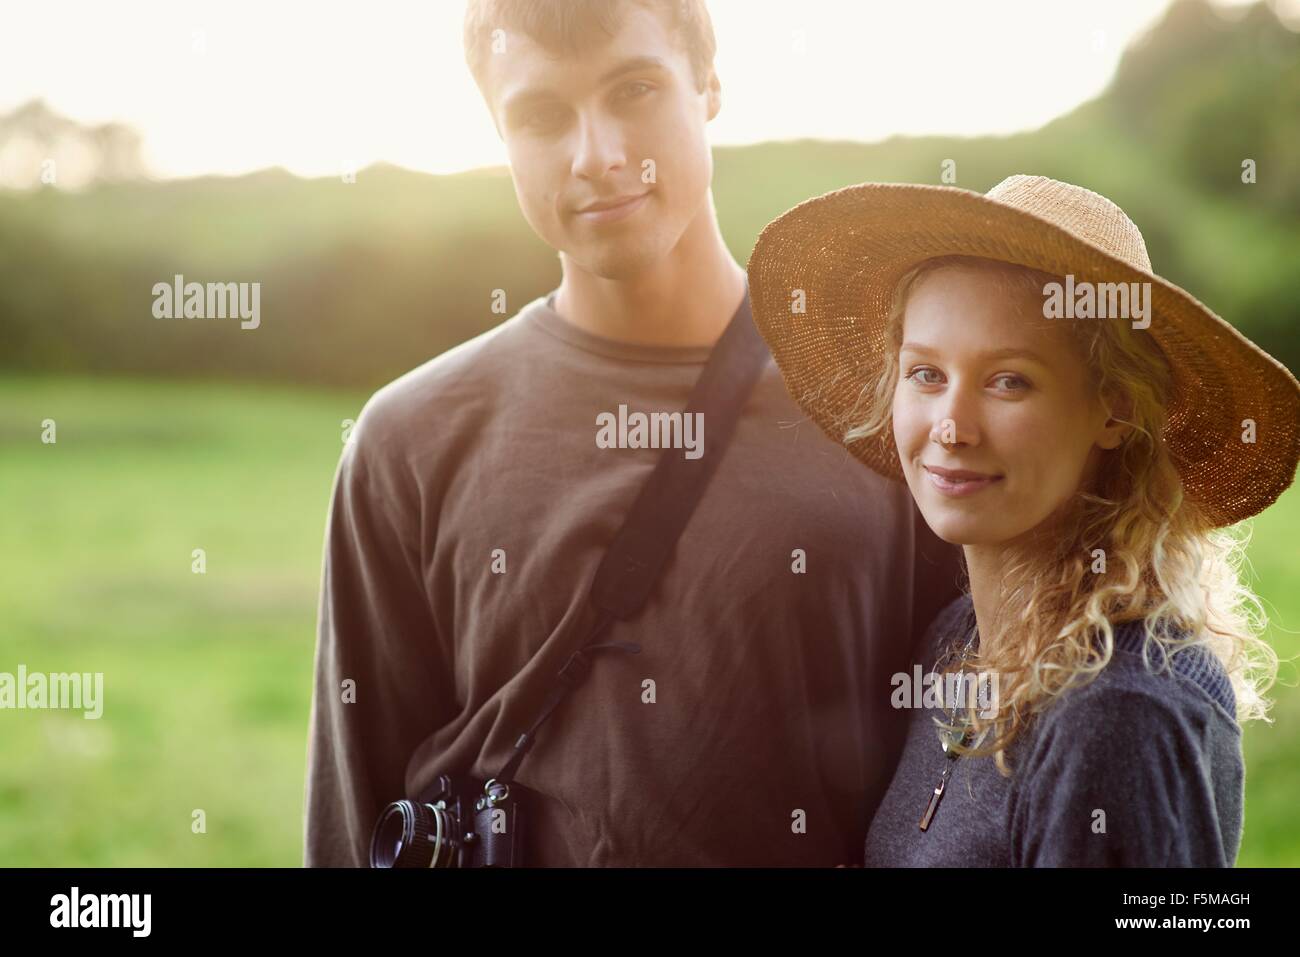 Portrait of romantic young couple in rural field Stock Photo